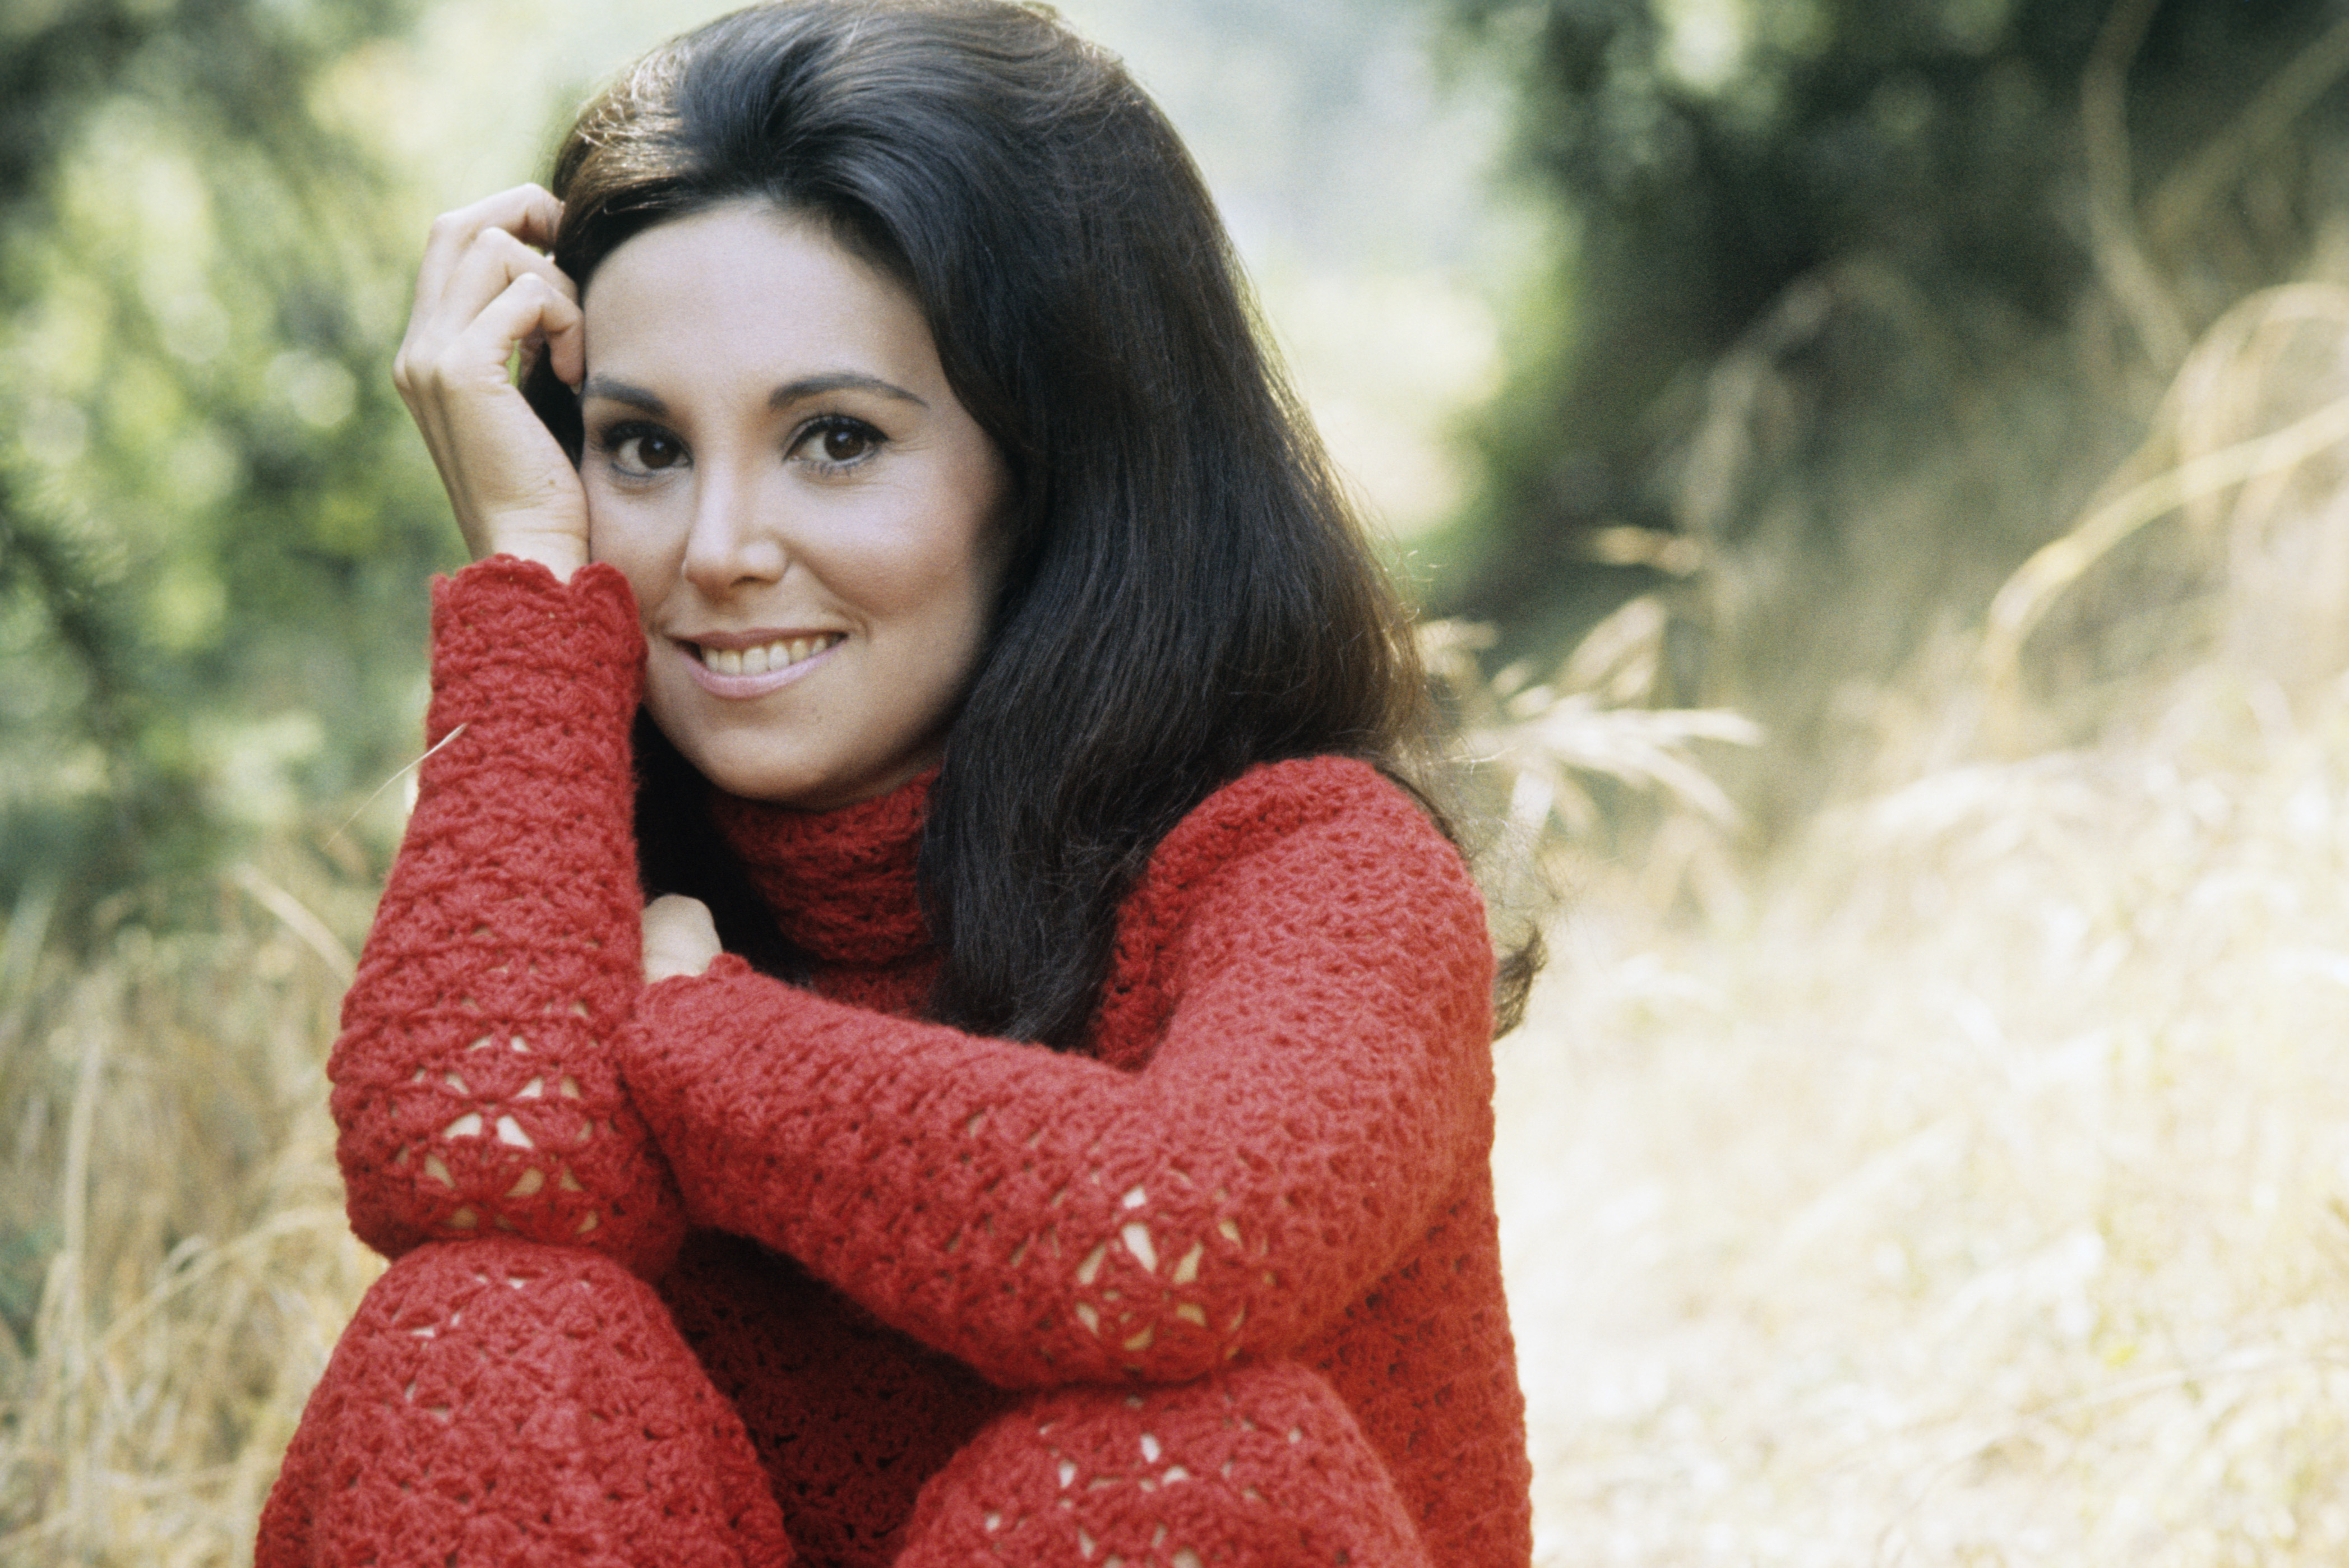 Marlo Thomas on "That Girl," circa 1970 | Source: Getty Images